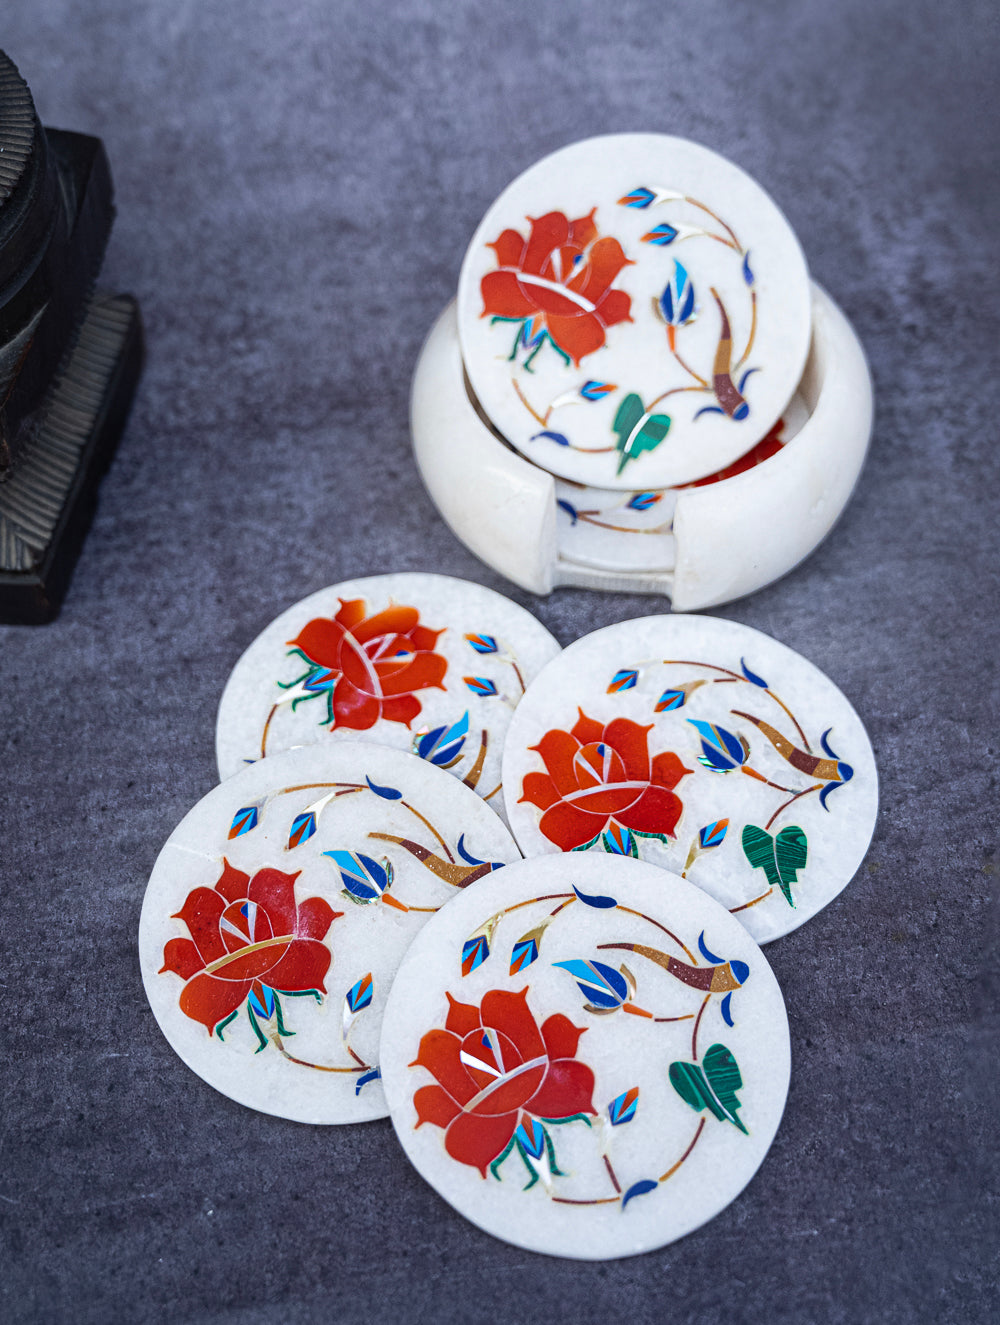 Load image into Gallery viewer, Floral Tapestry Marble Inlay Coasters